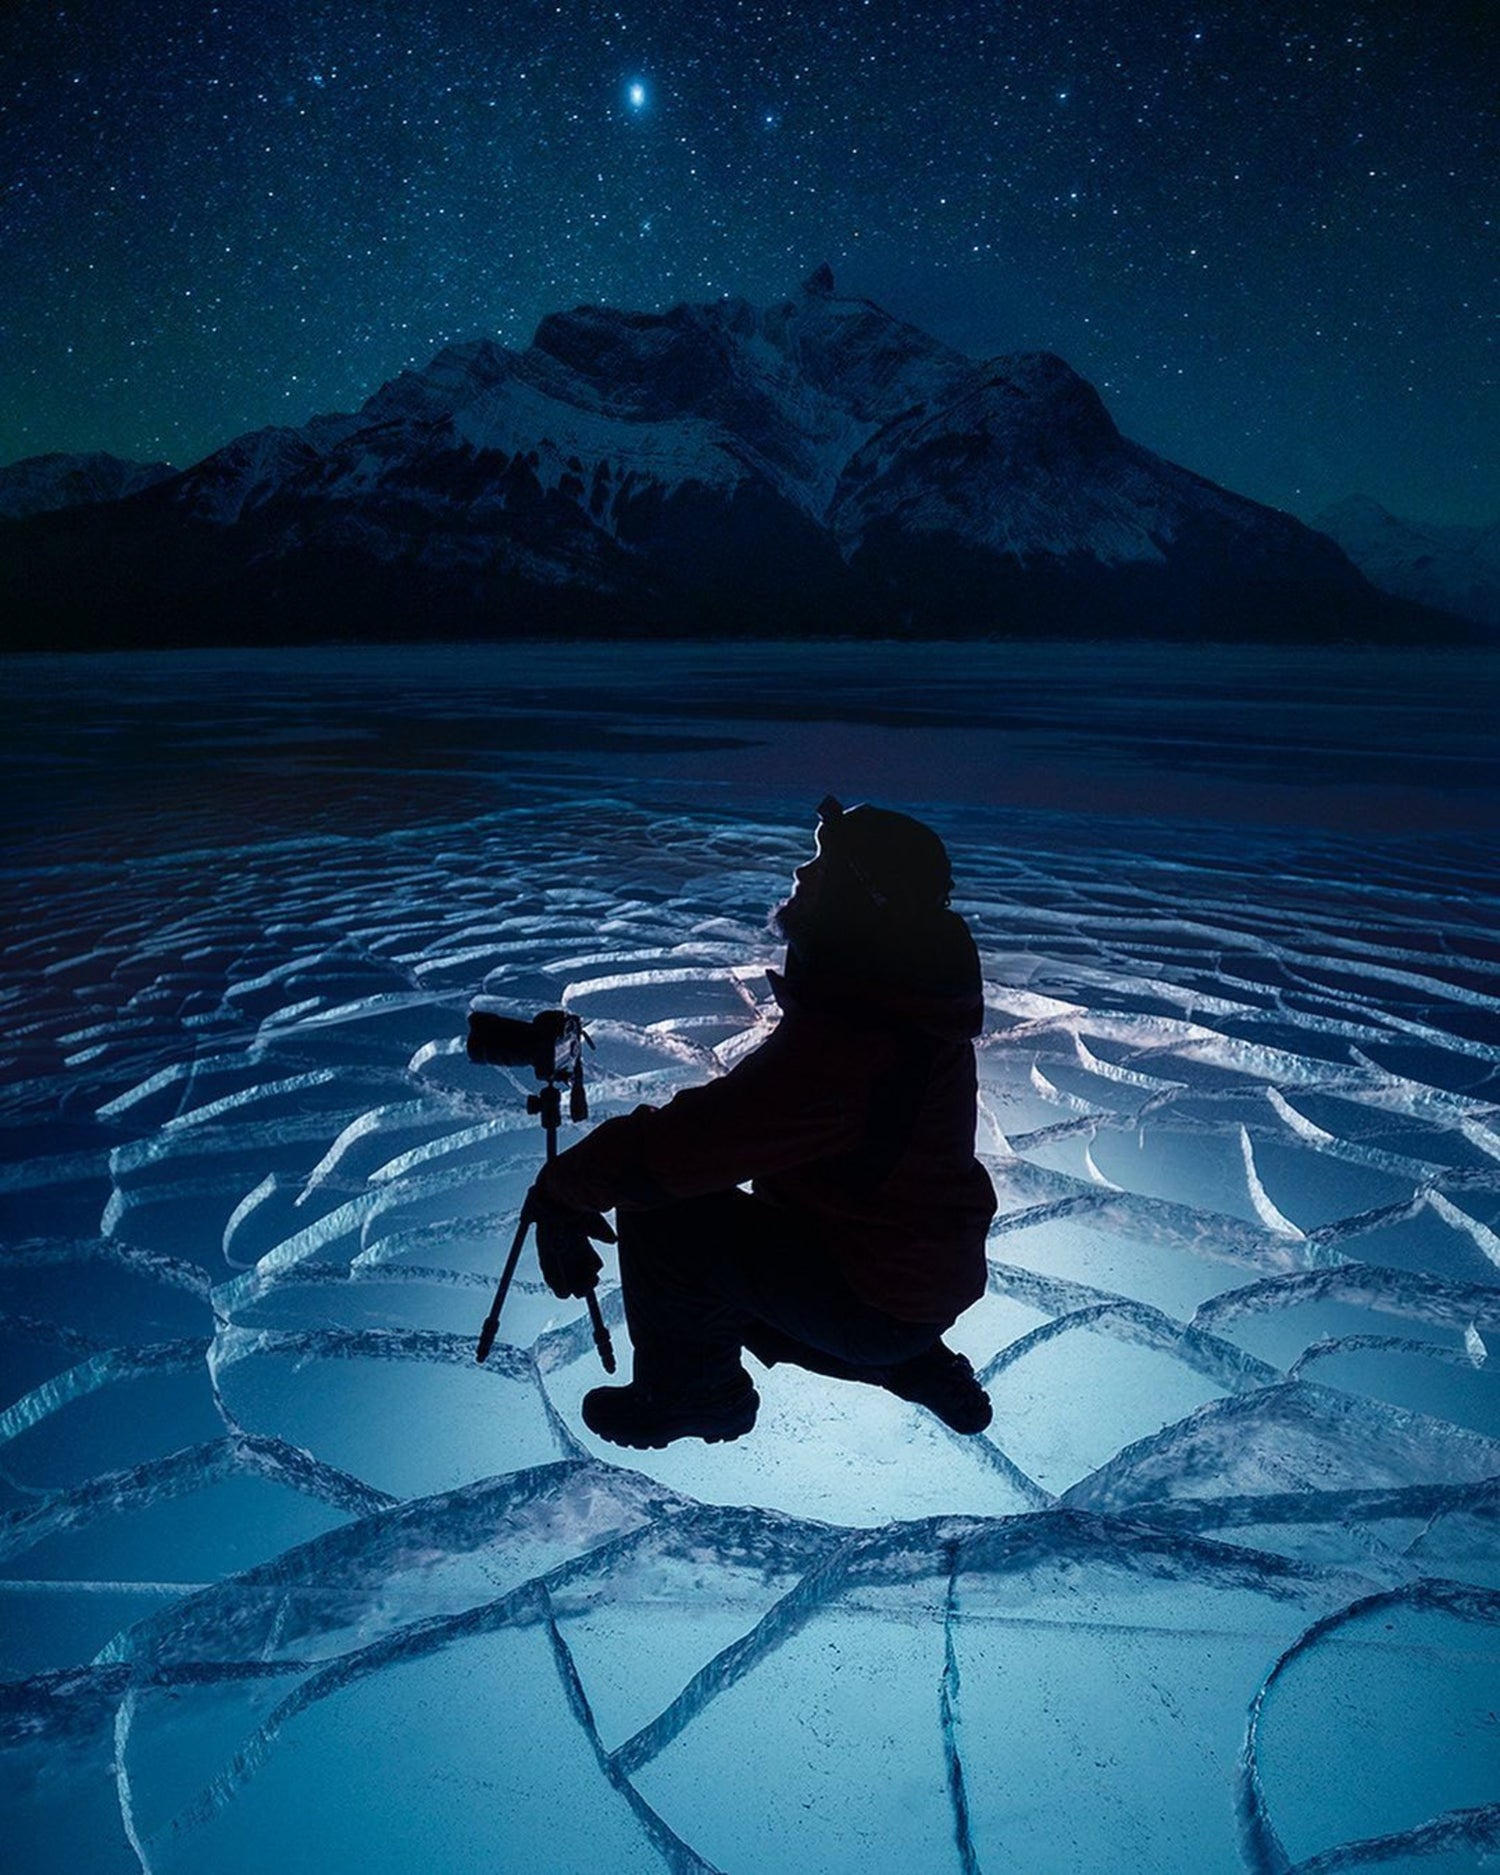 Shot with Lume Series: Paul Zizka's Cracked and Icy Photo